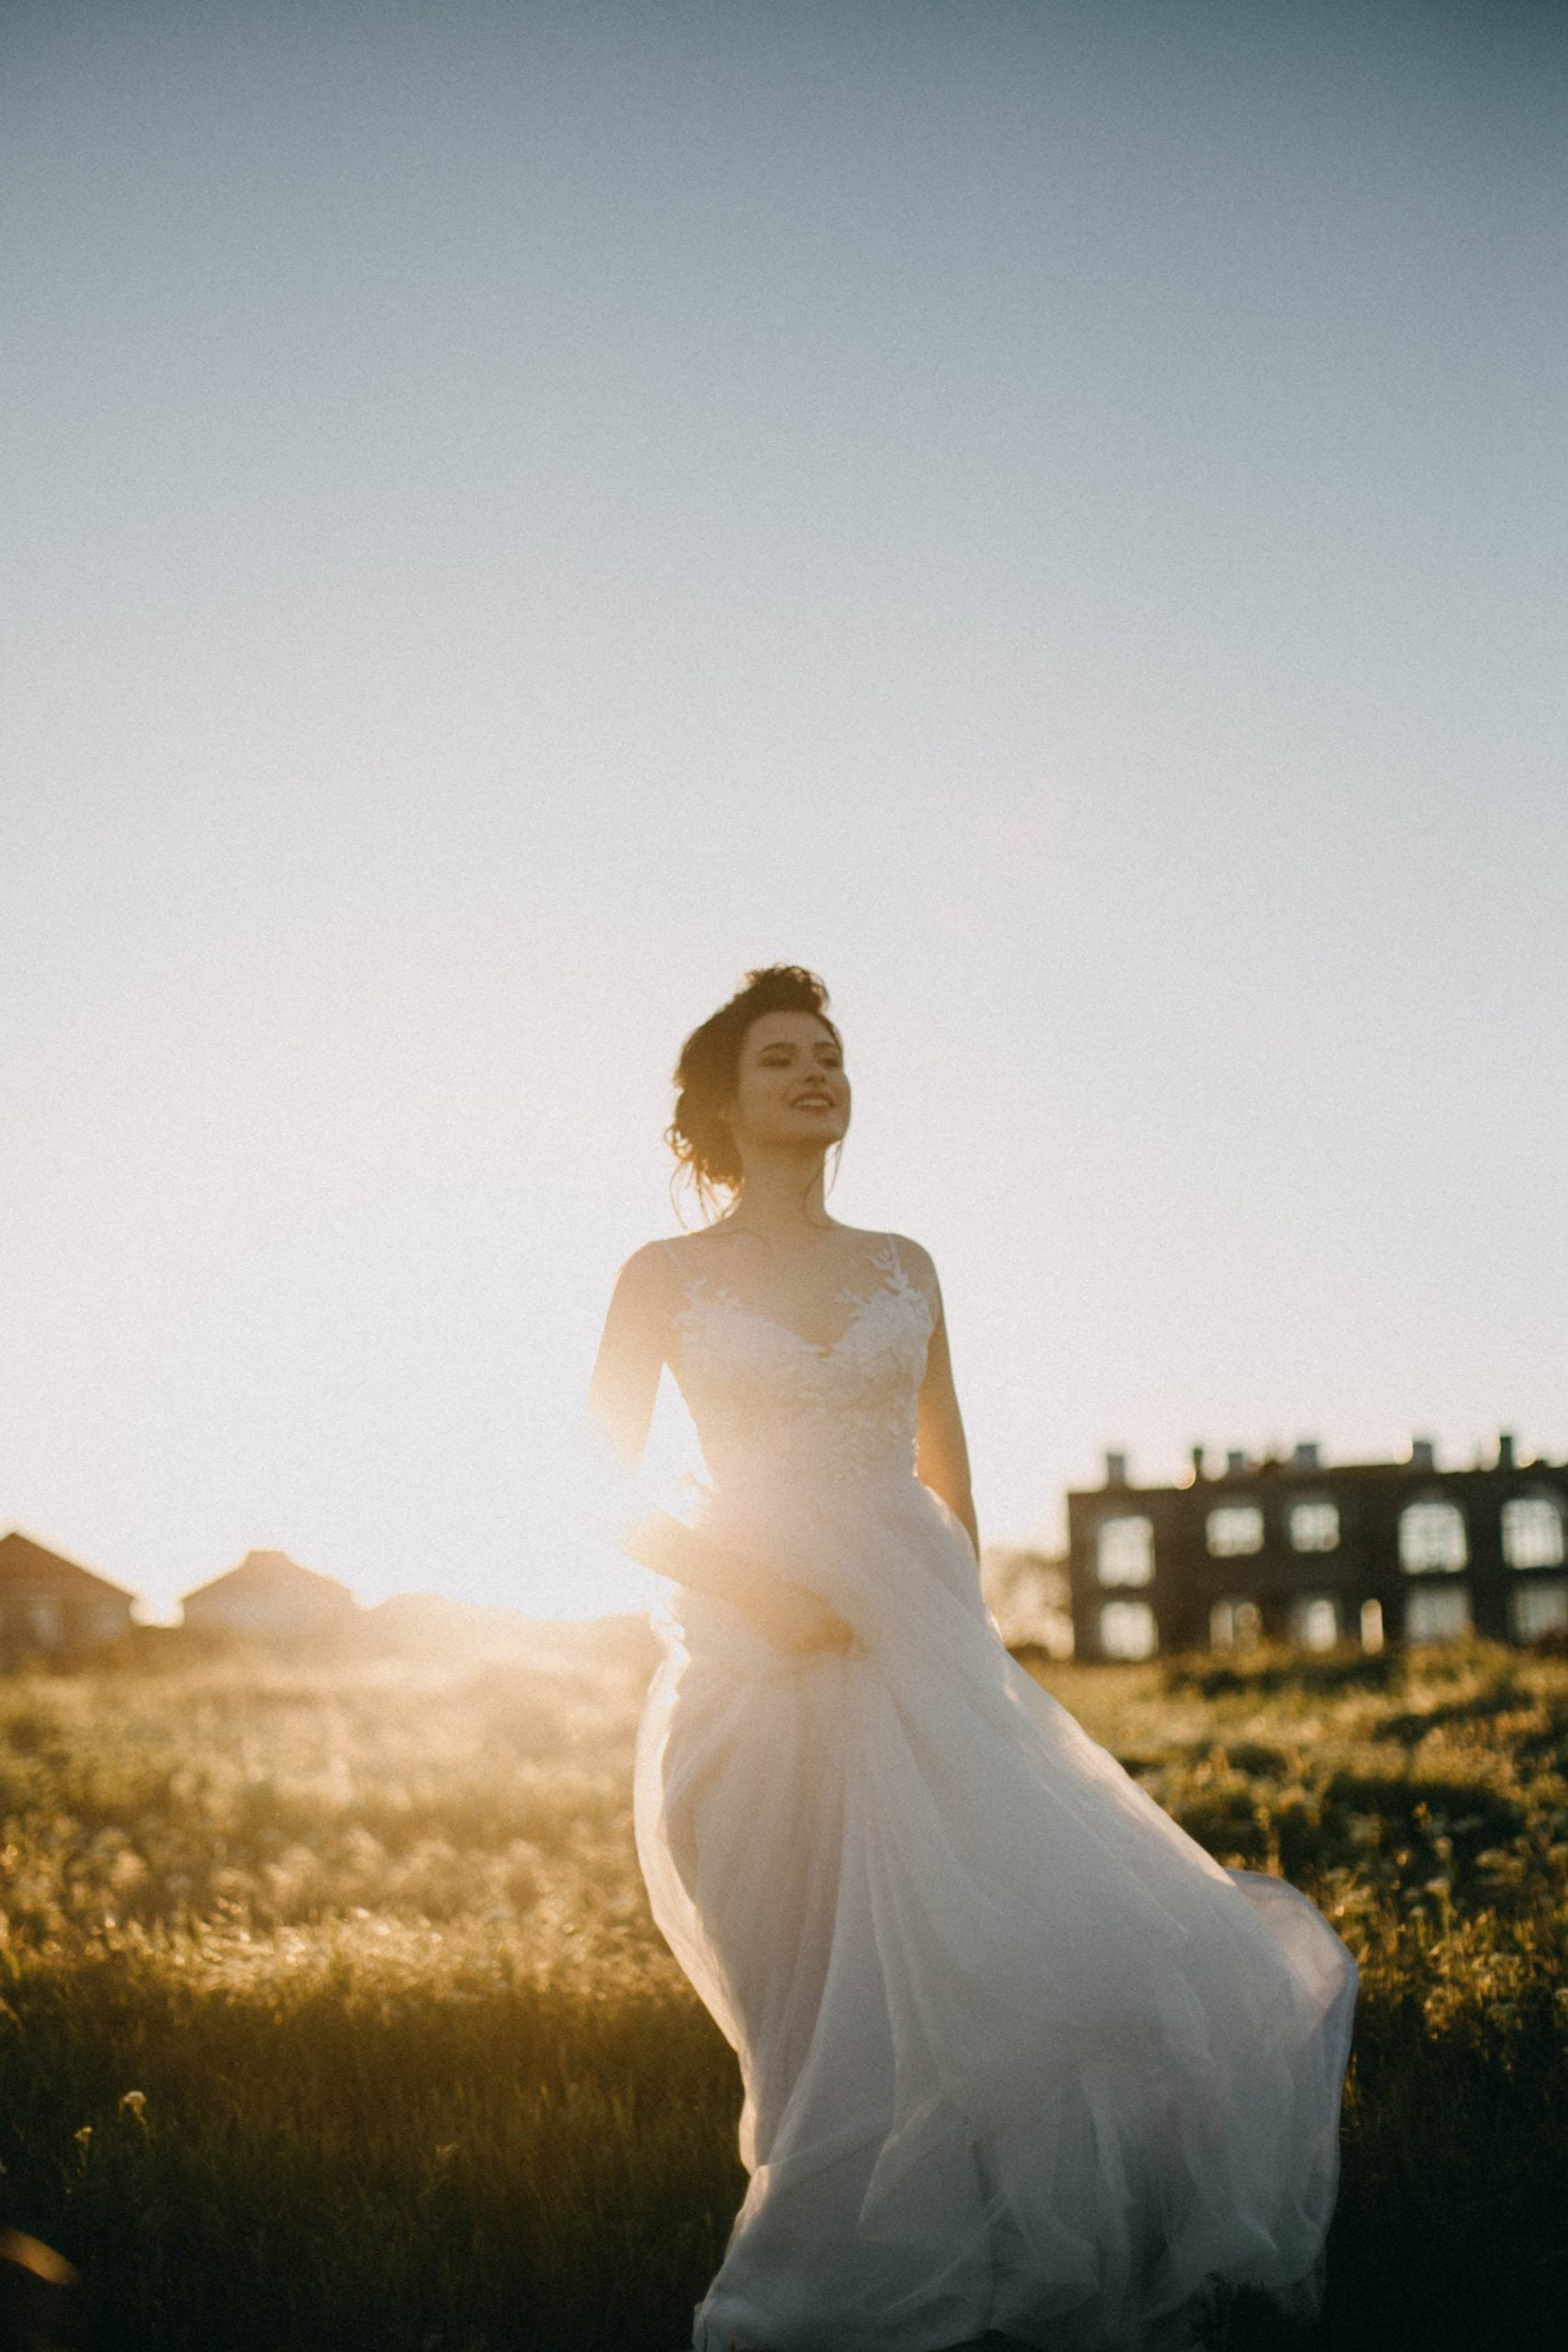 A beautiful bride with a white gown and veil stands outside on a sunny and windy day, smiling happily.